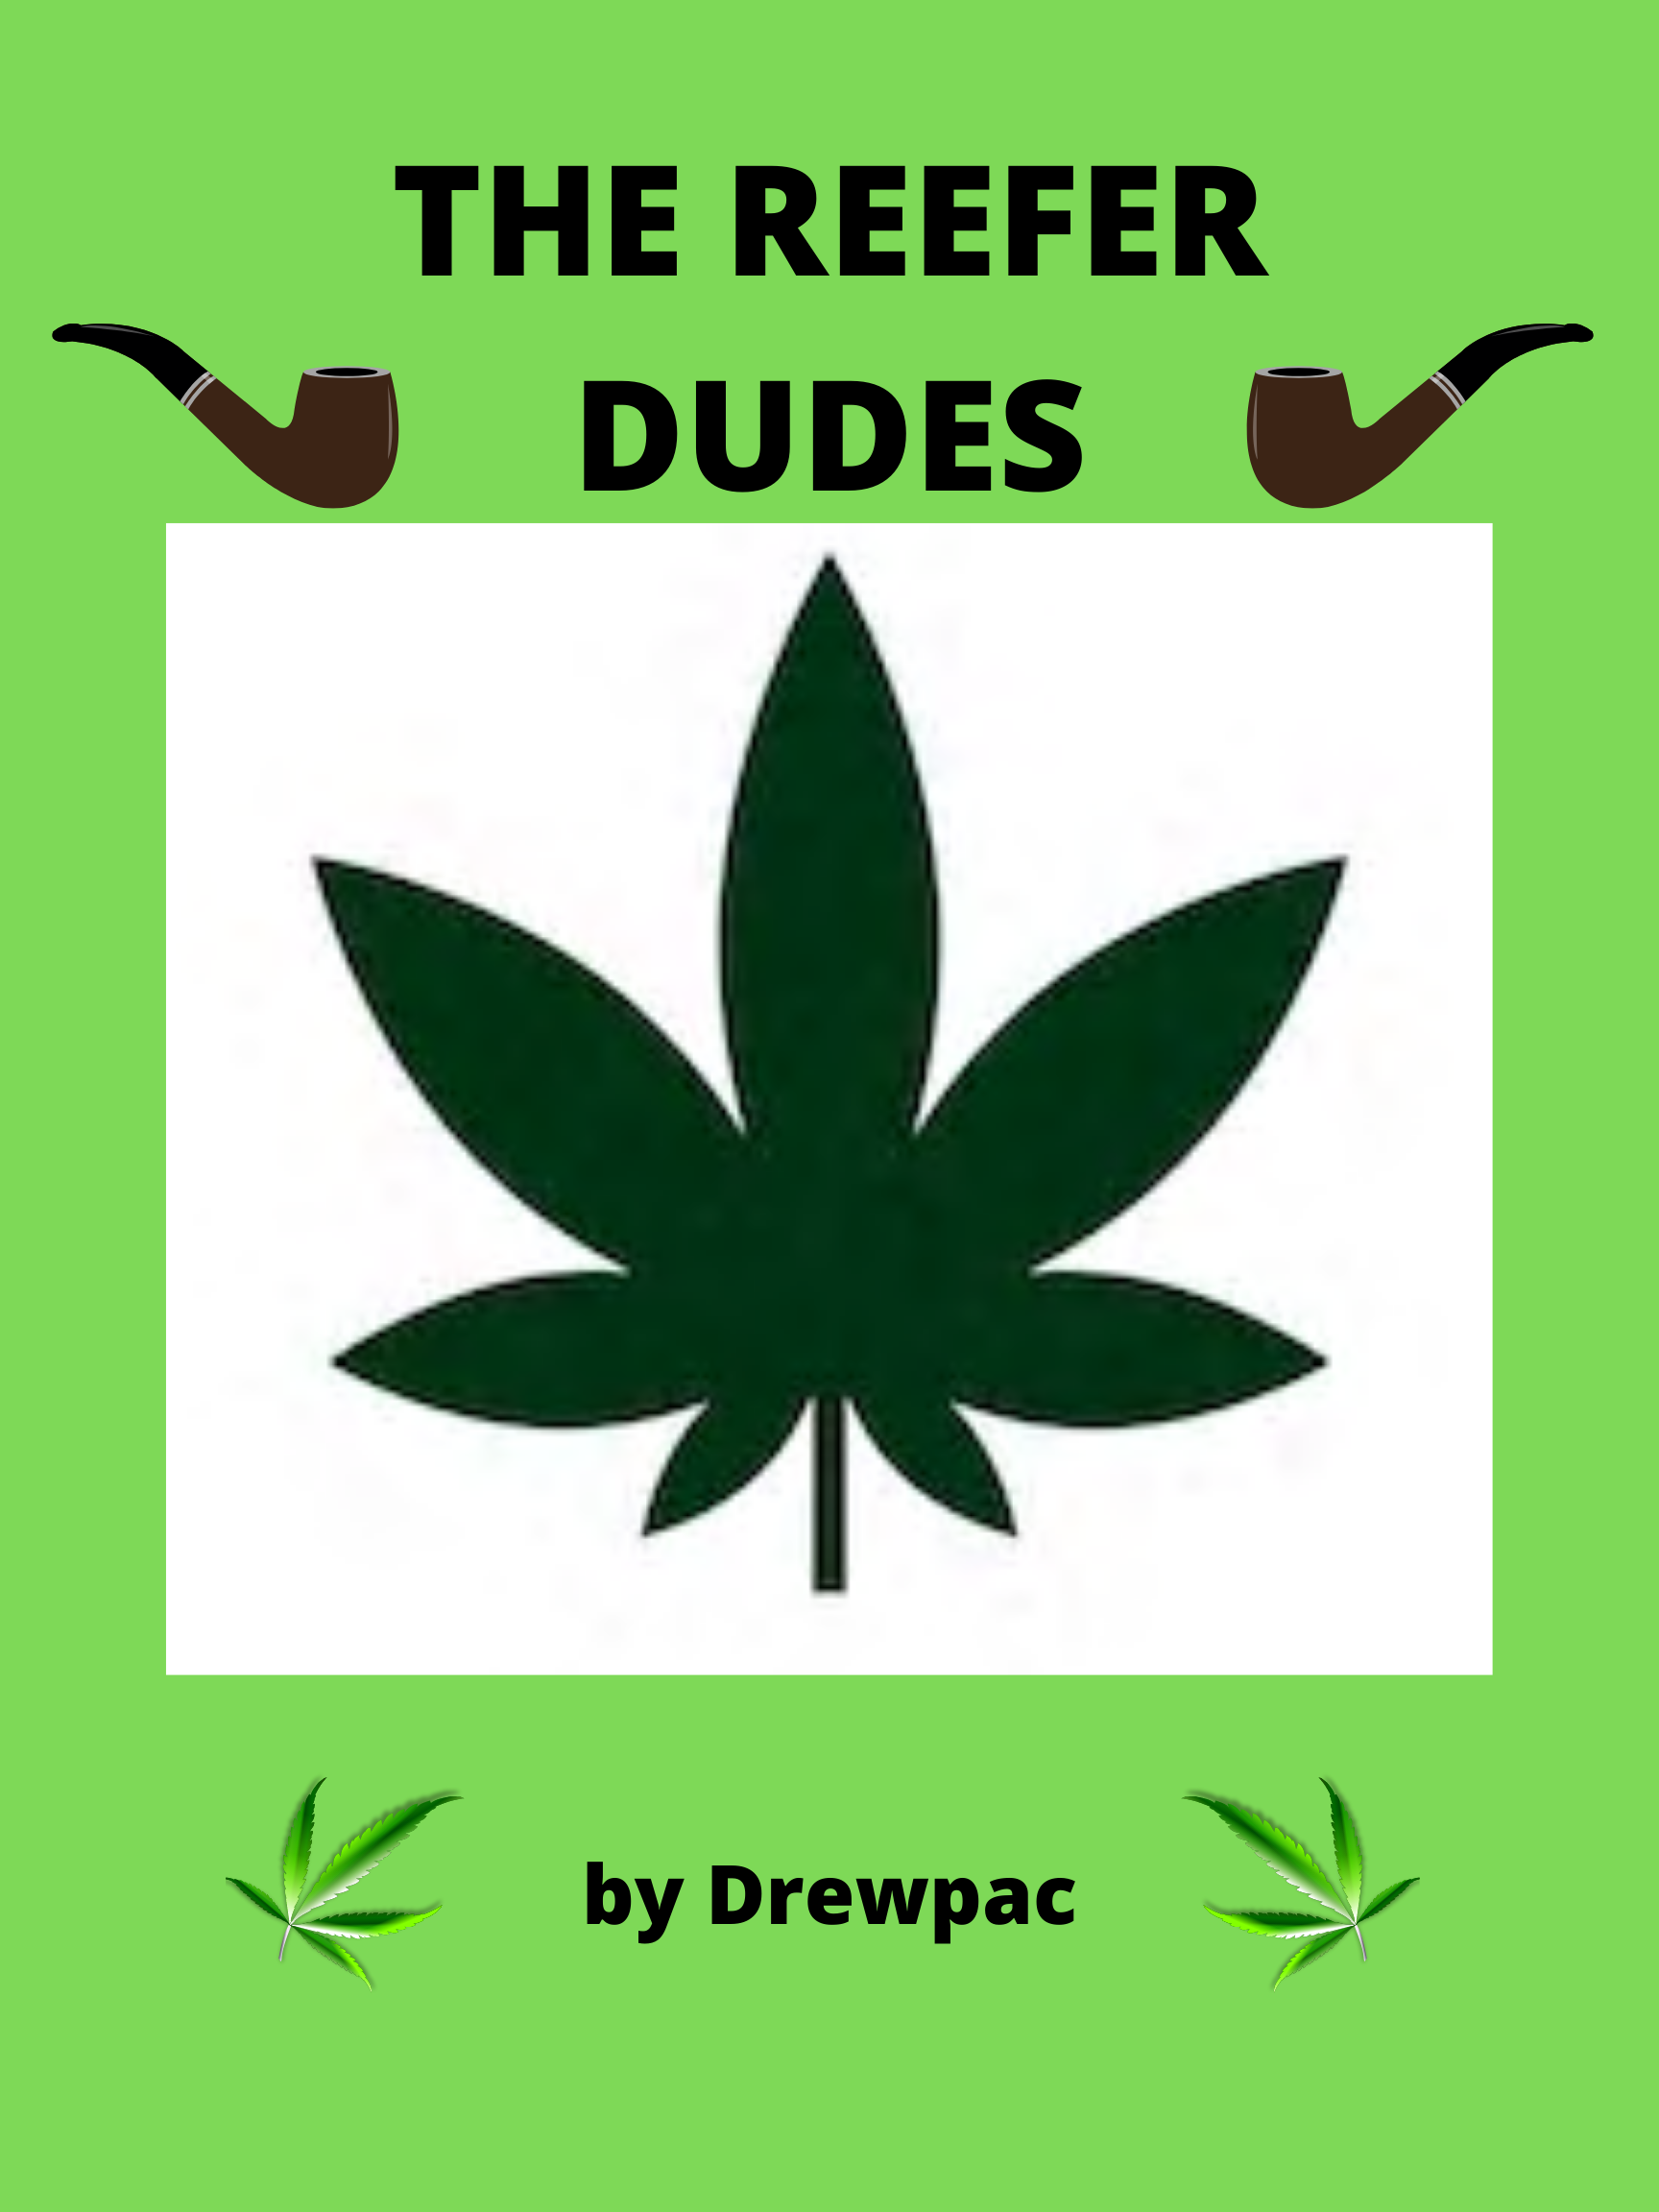 THE REEFER DUDES